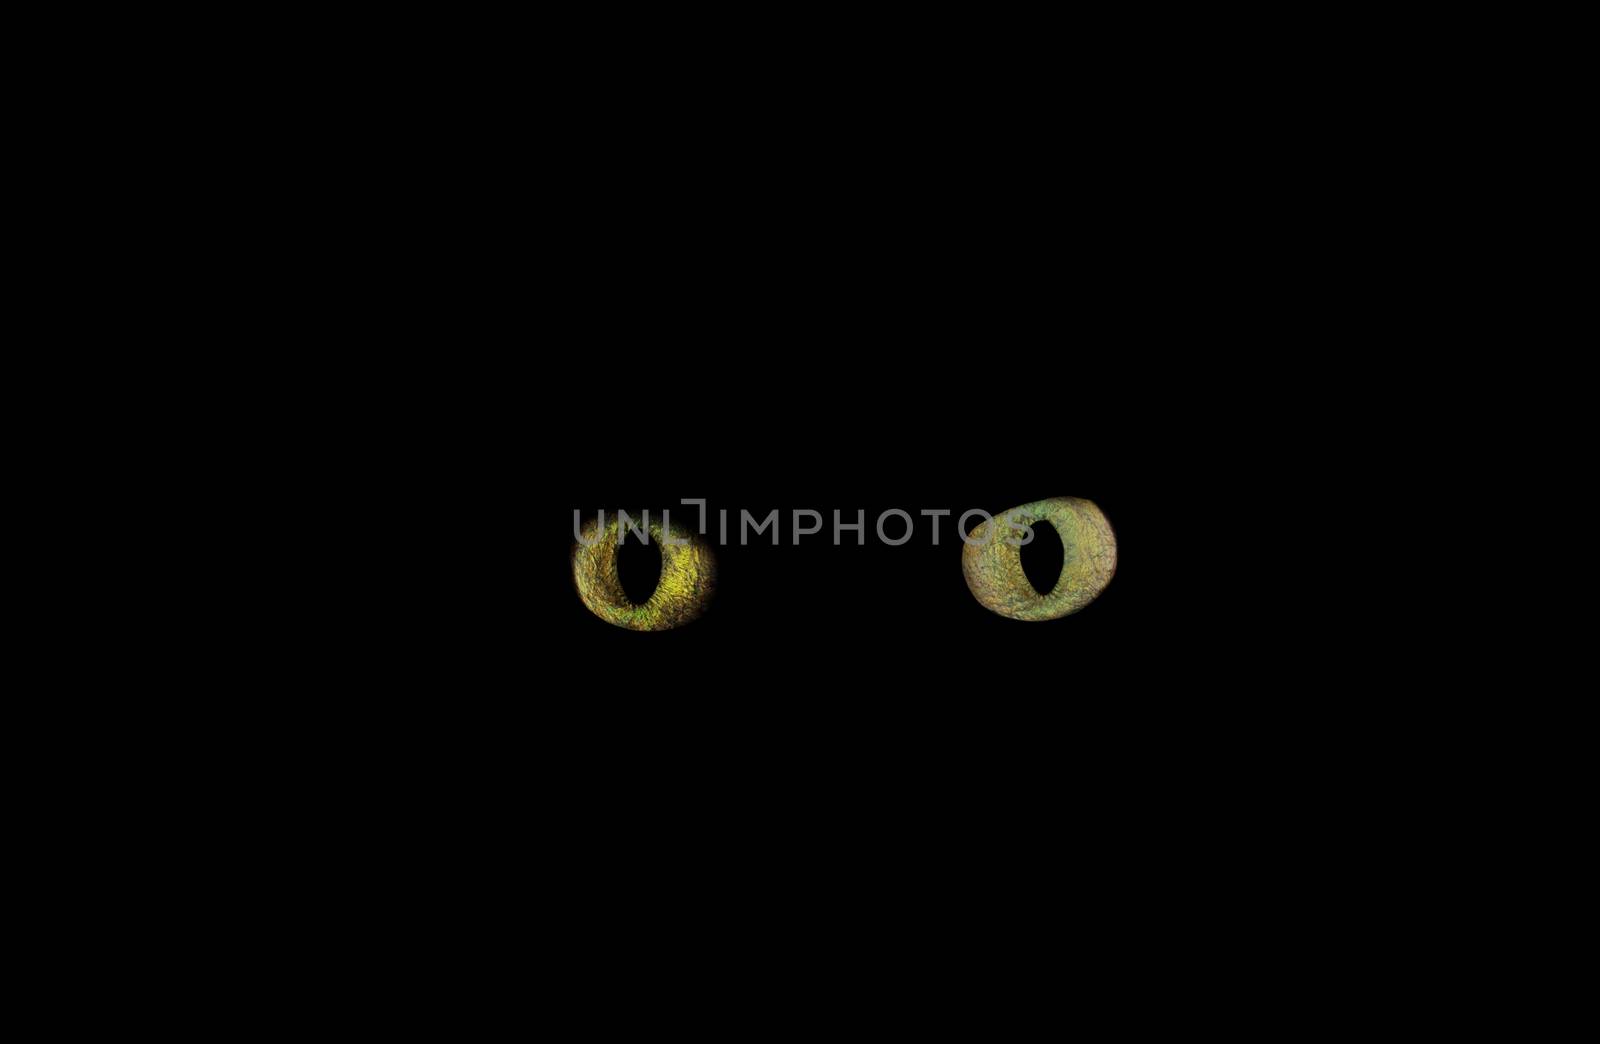 Green and yellow cat eyes in the darkness. Halloween concept. 